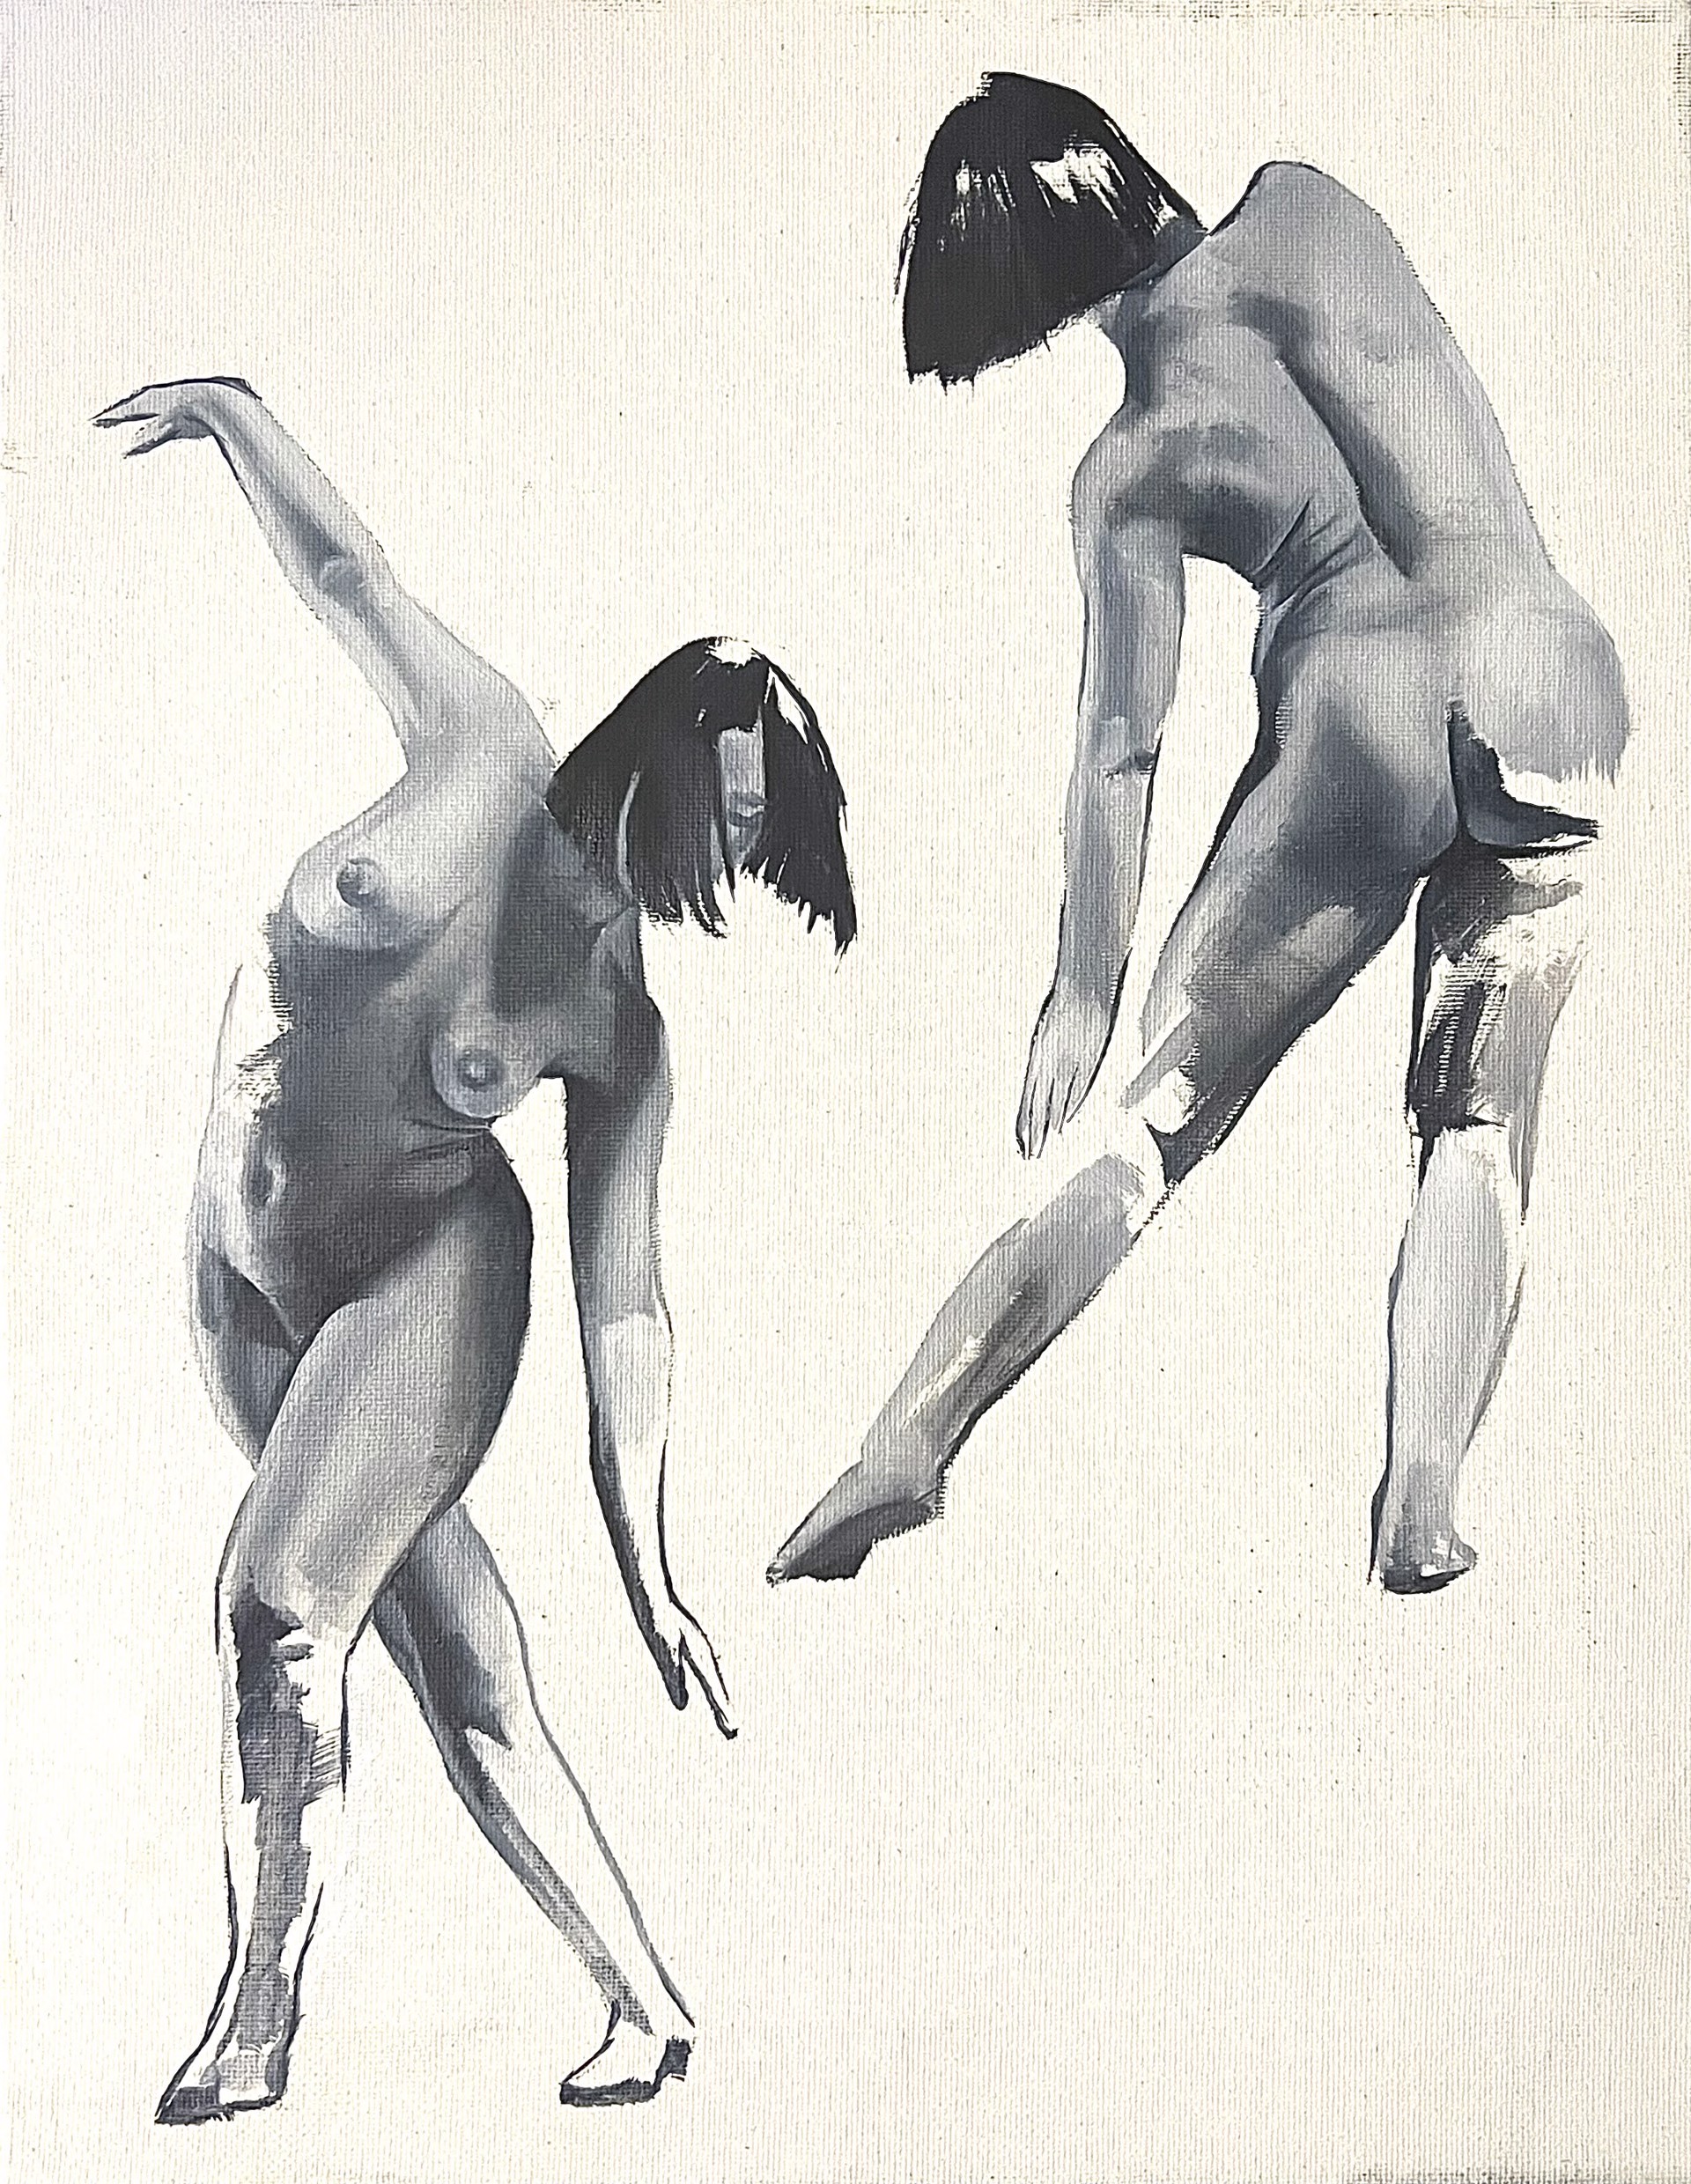 Nude Studies No.1 by Jenna Hauser